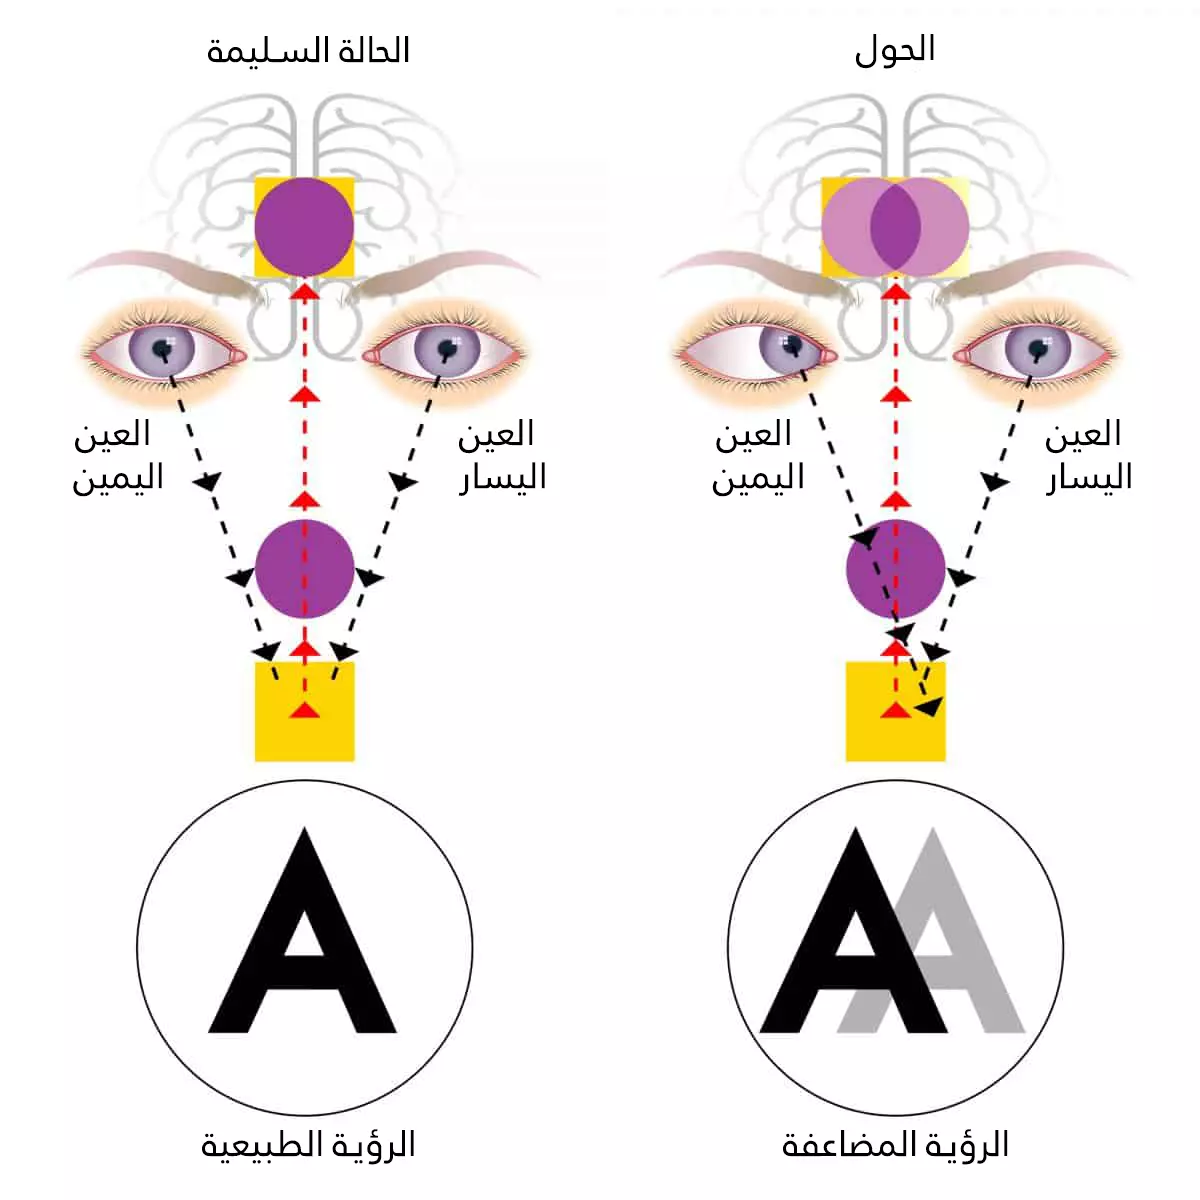 In a normal machine, the eyes focus on the same point, but in strabismus, the eyes focus on two different points